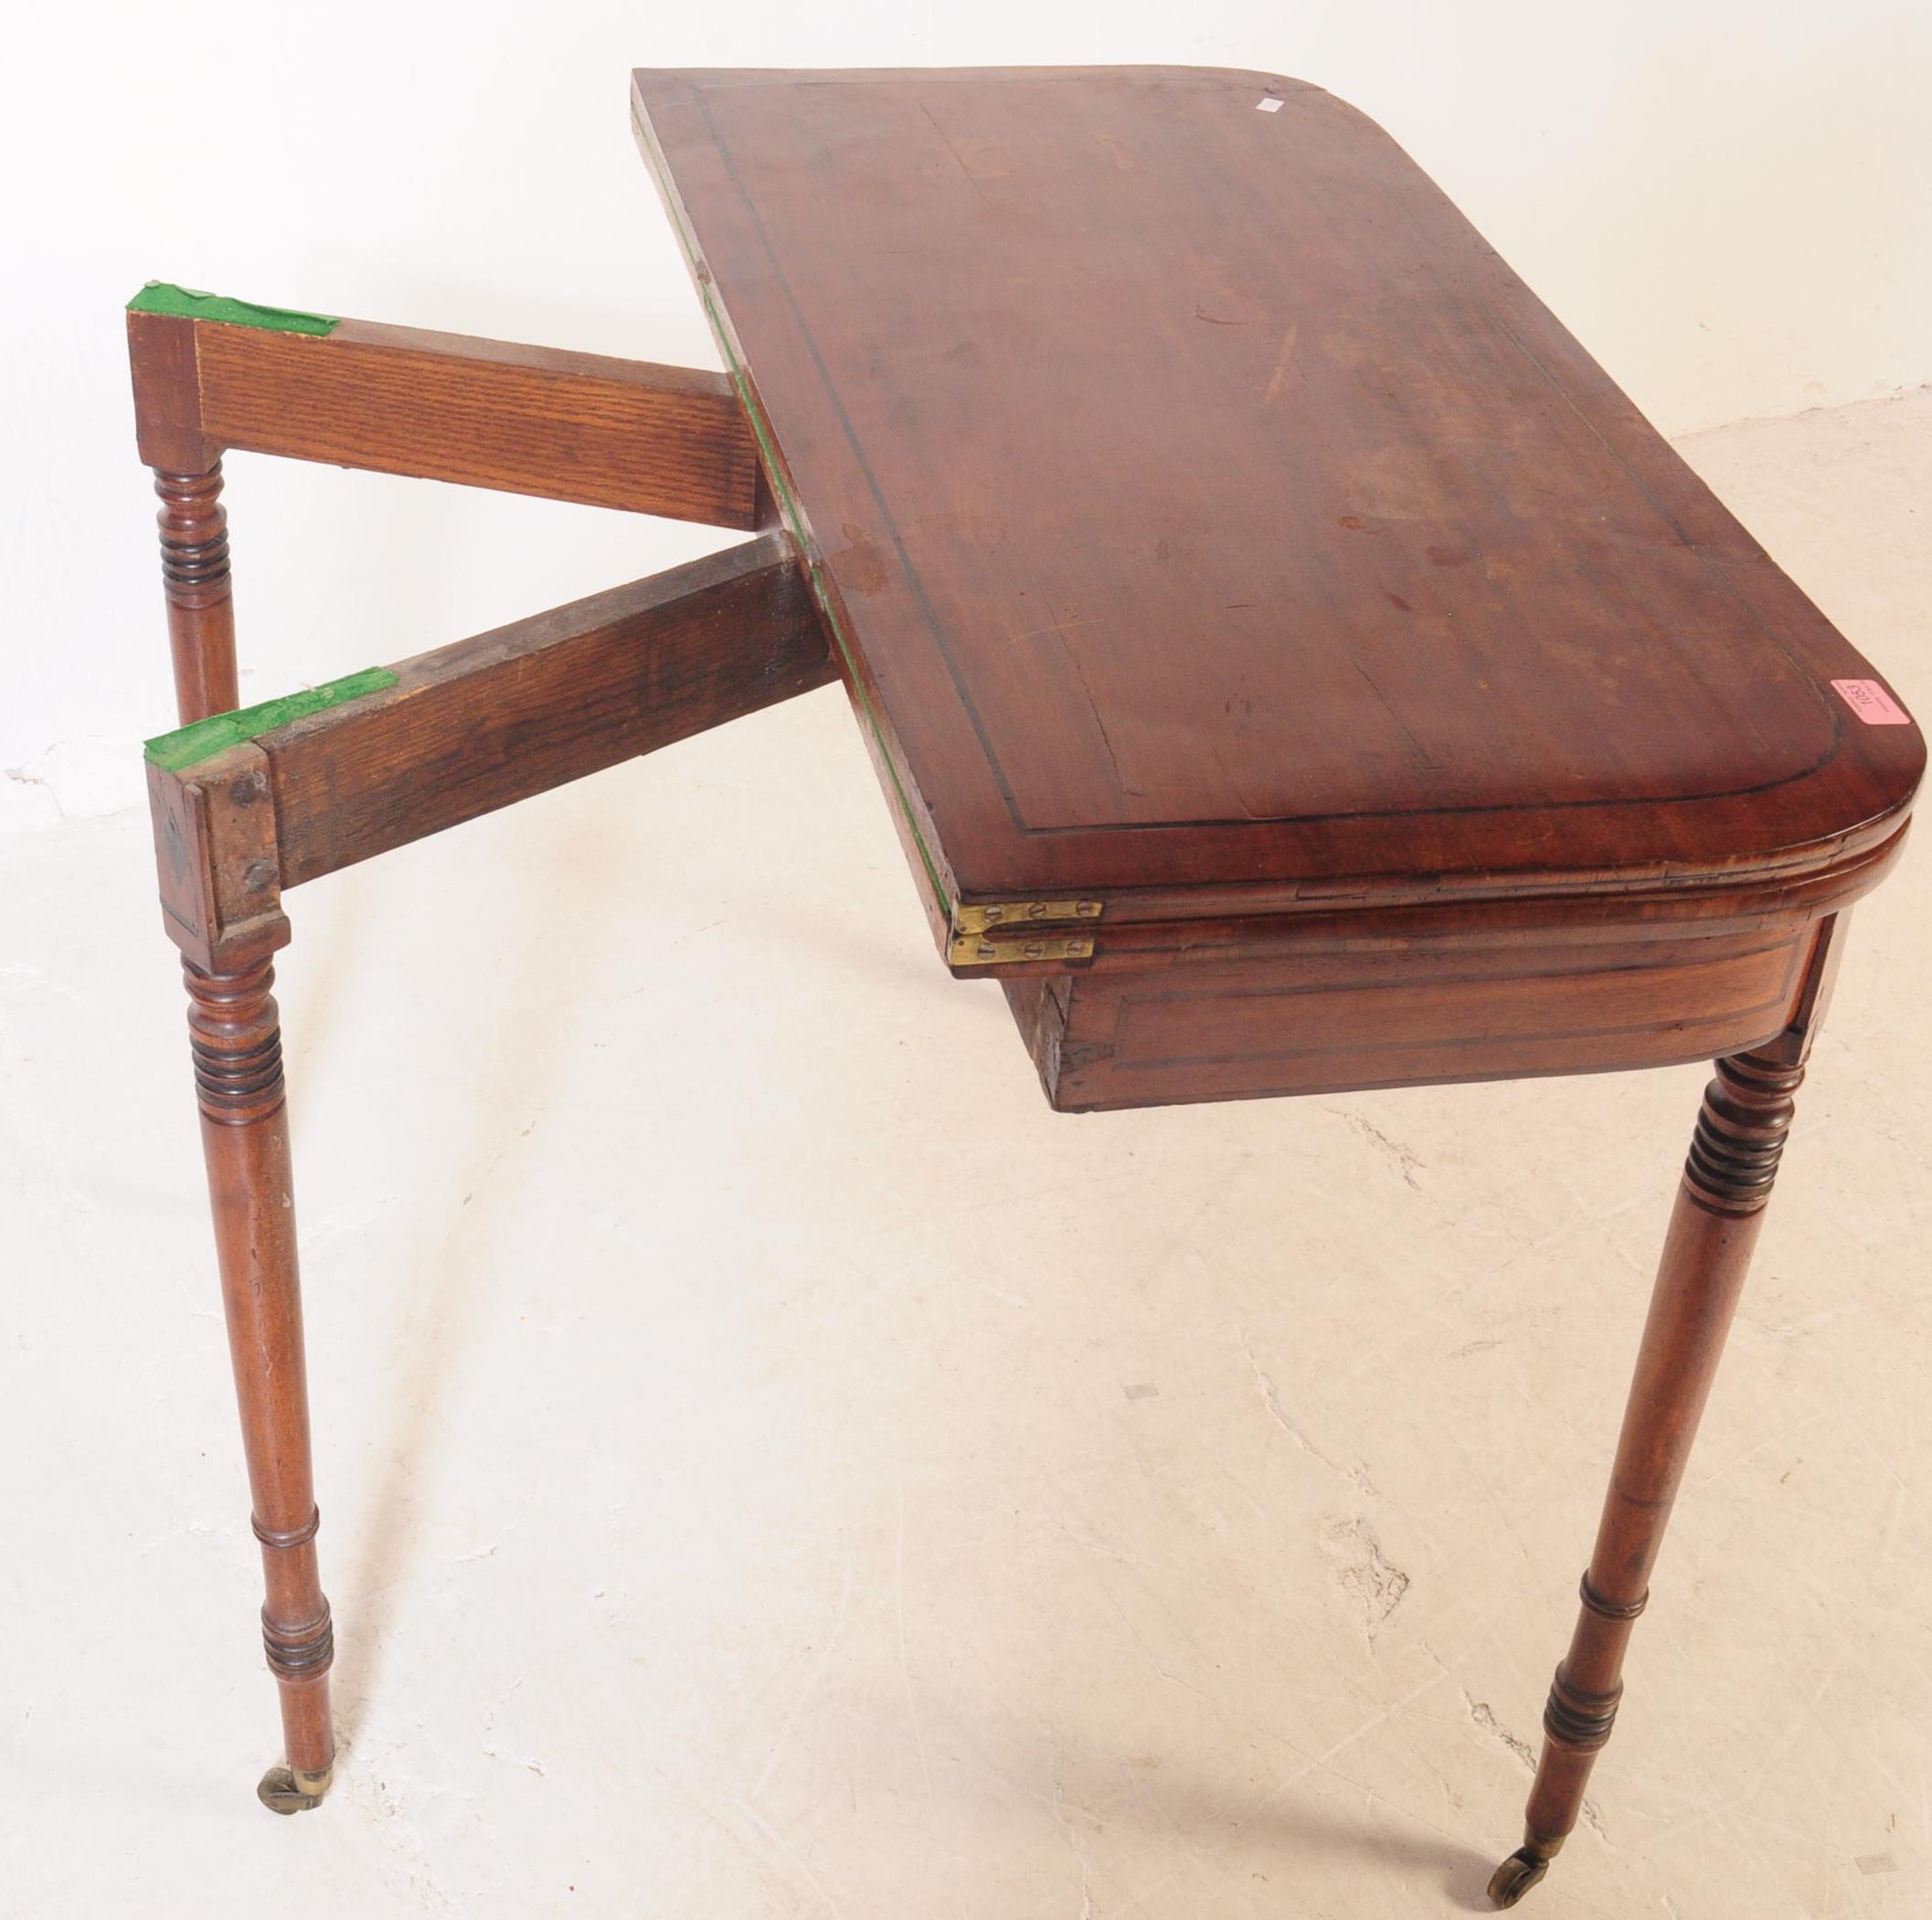 LATE 18TH CENTURY MAHOGANY FOLDING GAMES TABLE - Image 4 of 7